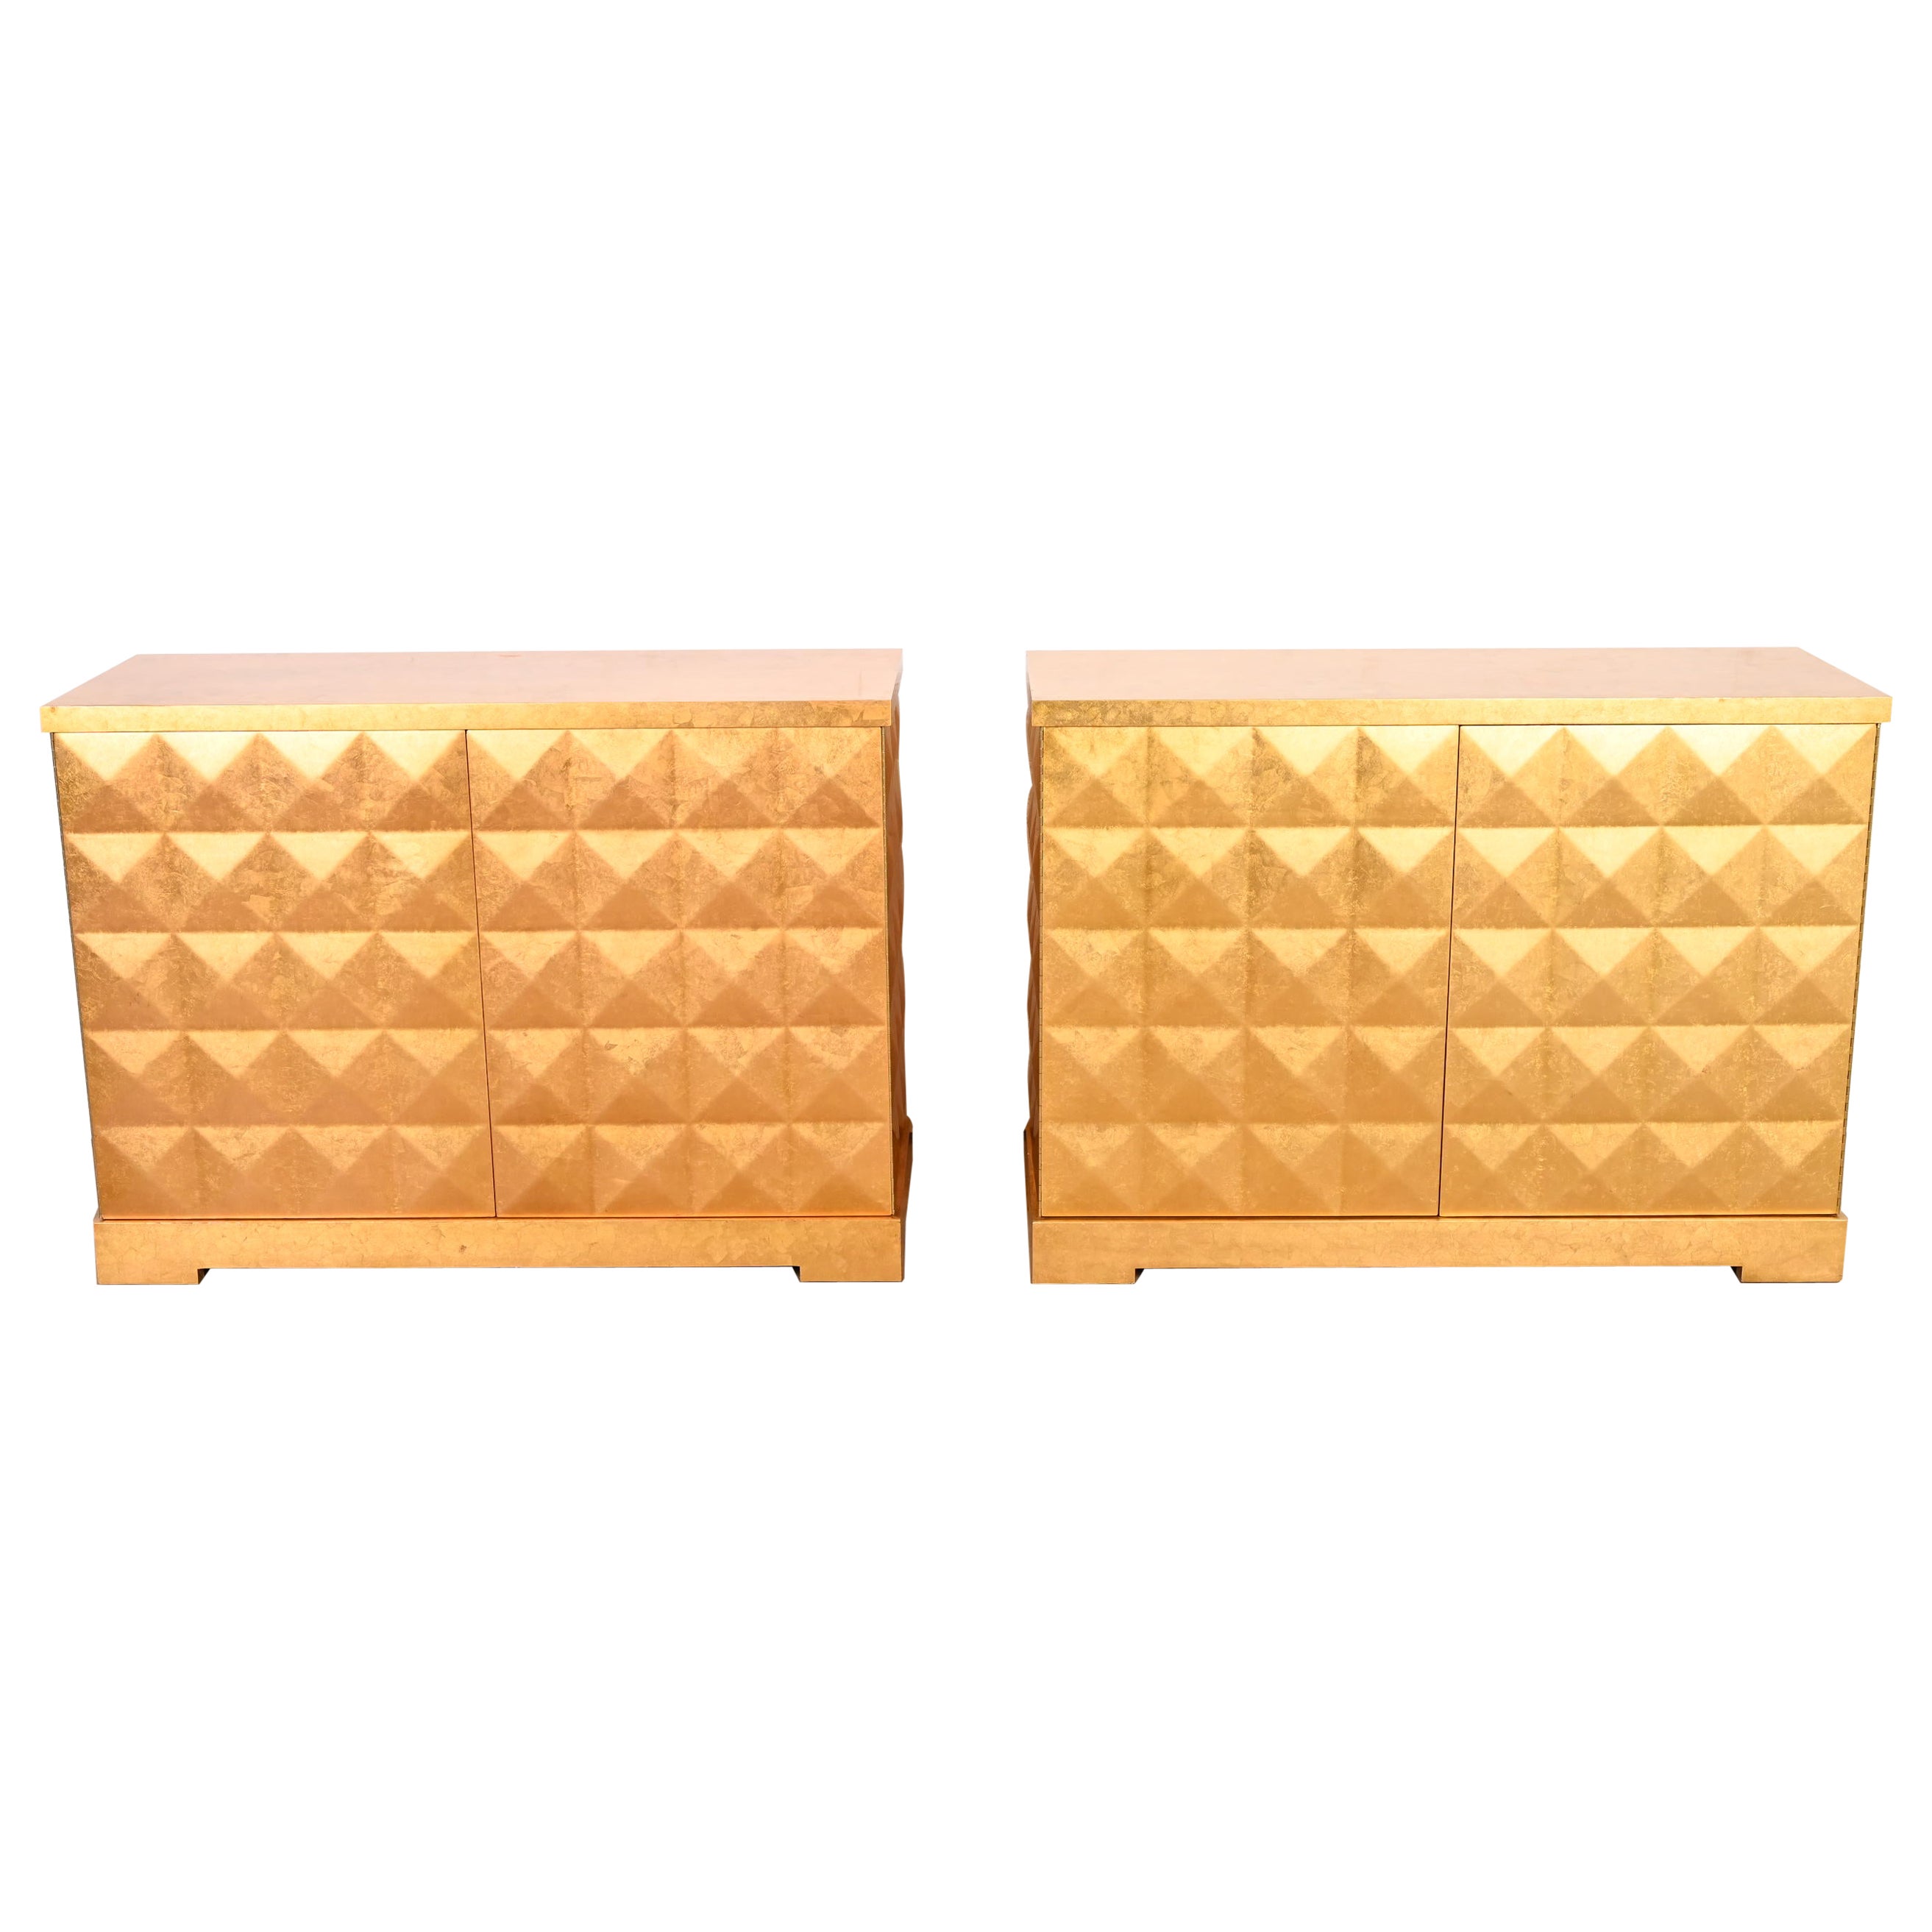 Barbara Barry for Baker Furniture Diamond Gold Leaf Cabinets, Pair